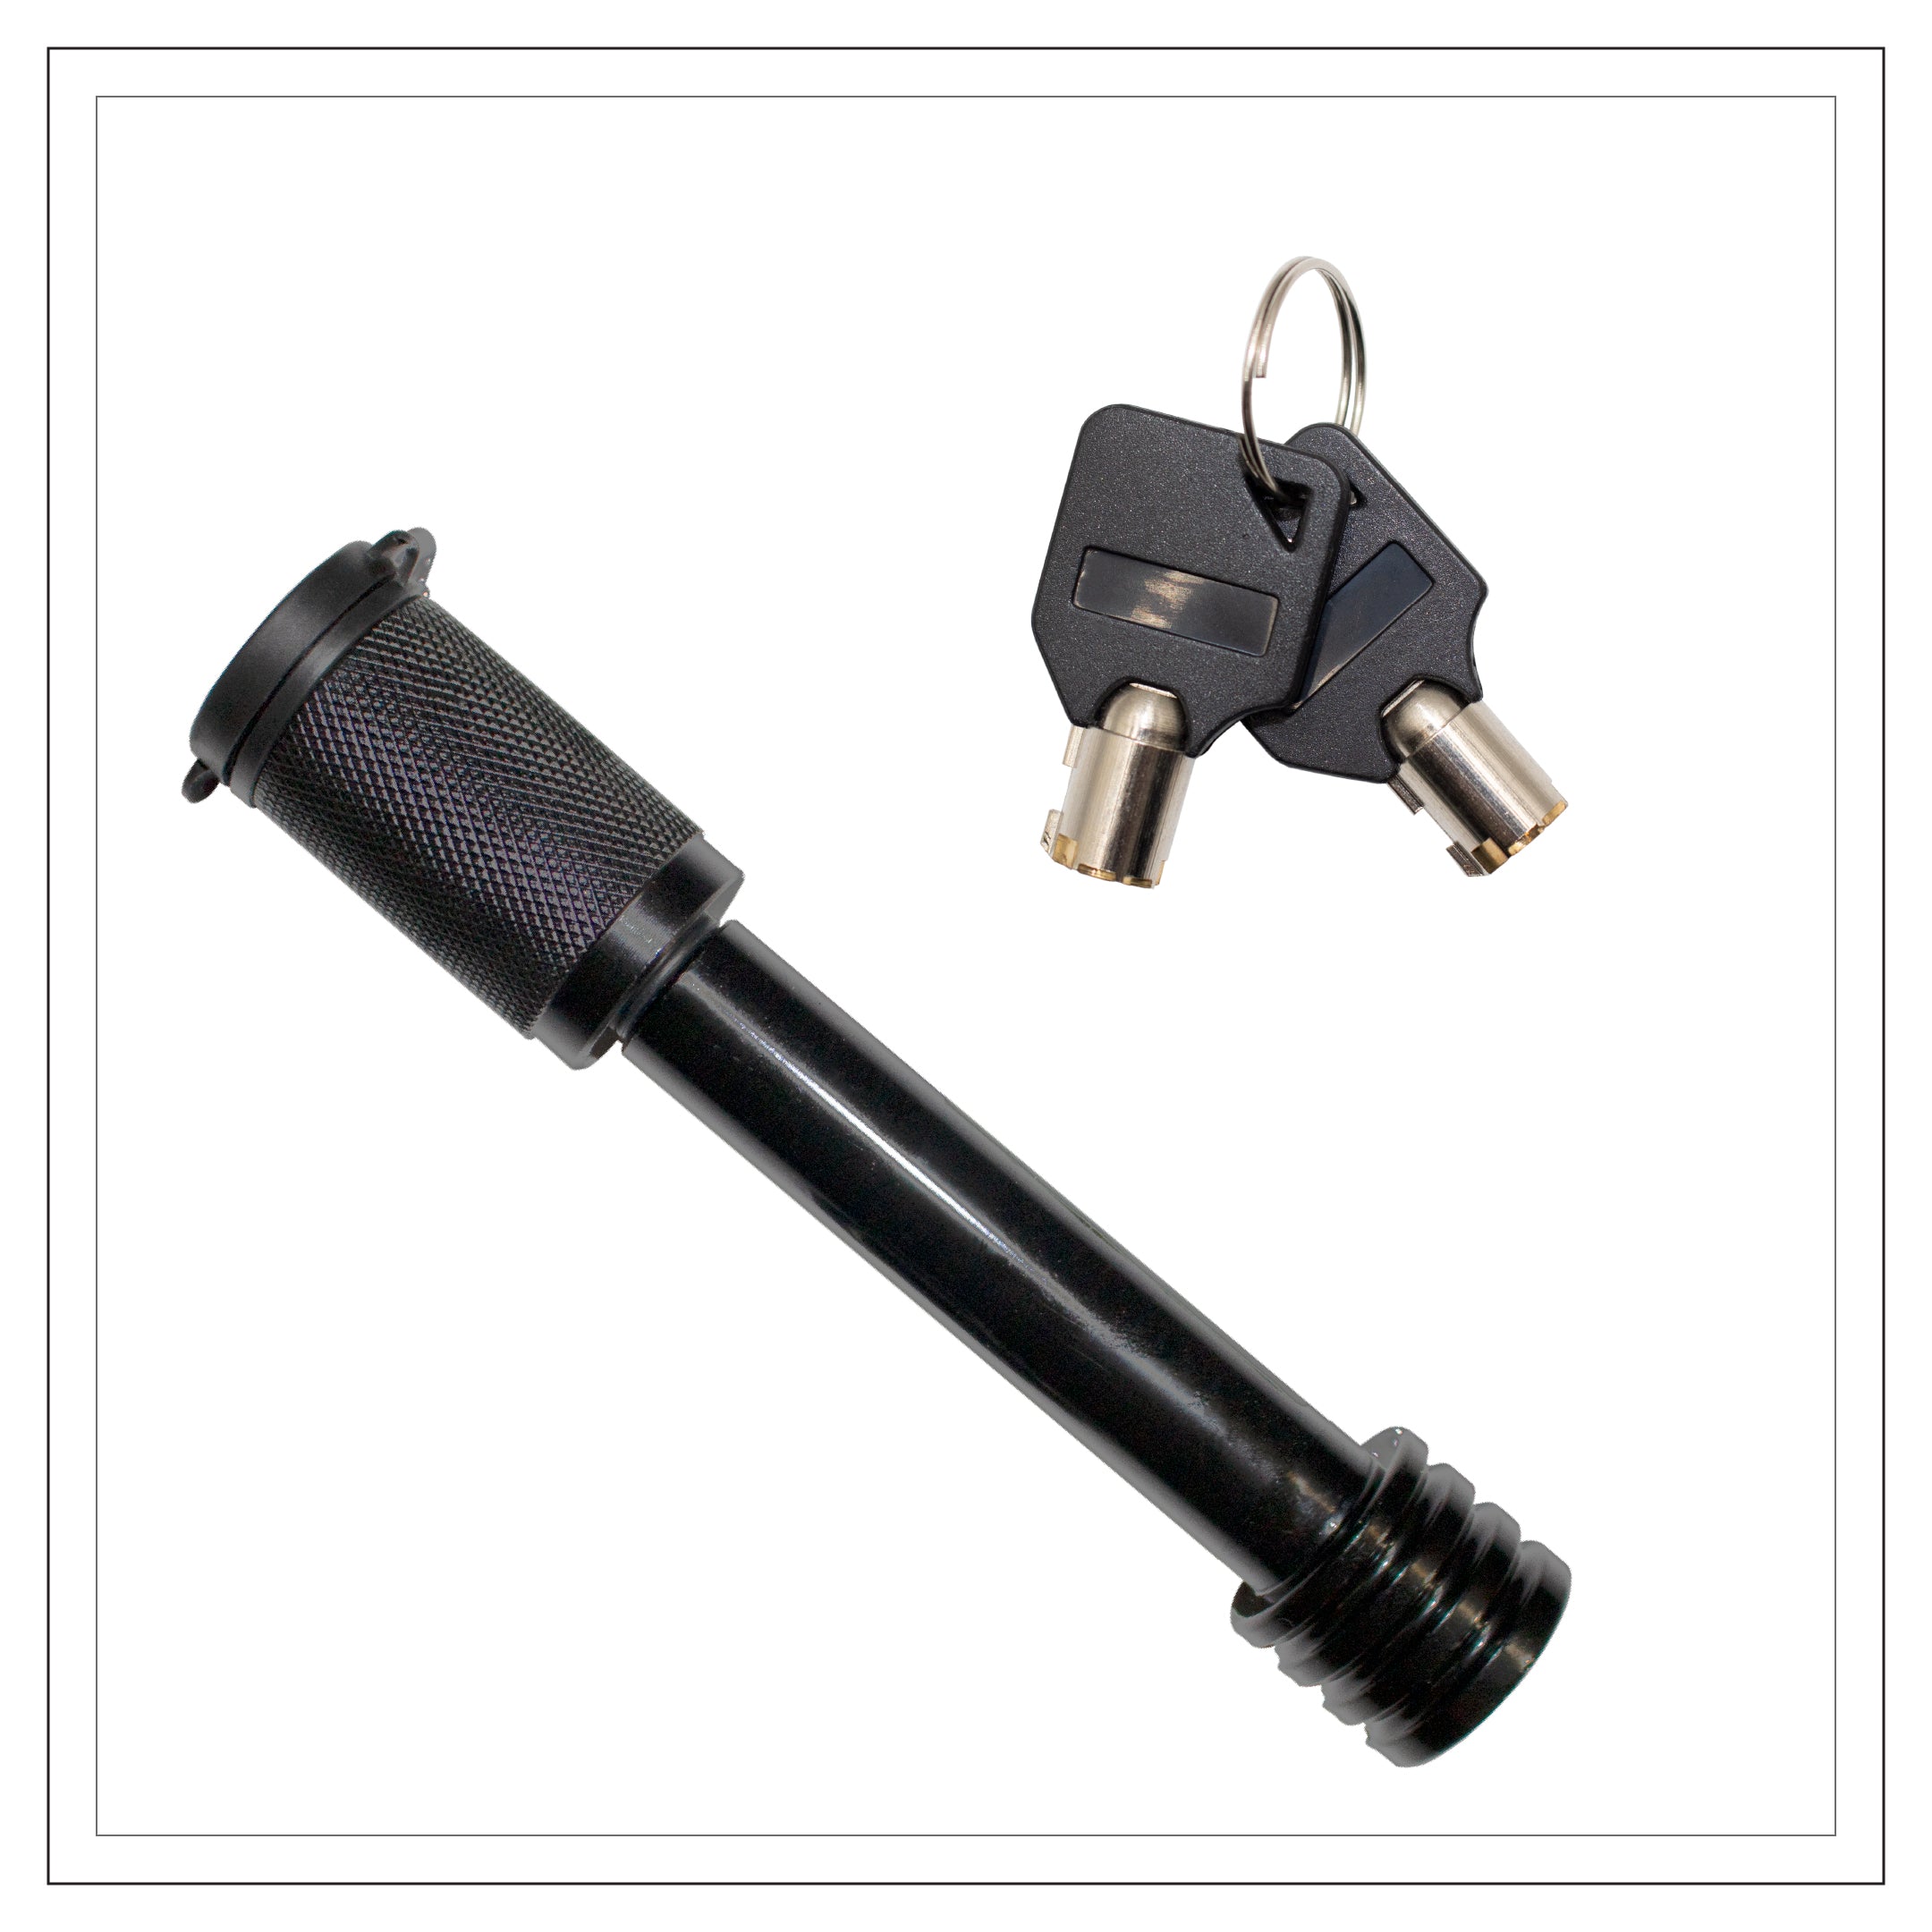 Hitch Lock with 3-1/2" effective length